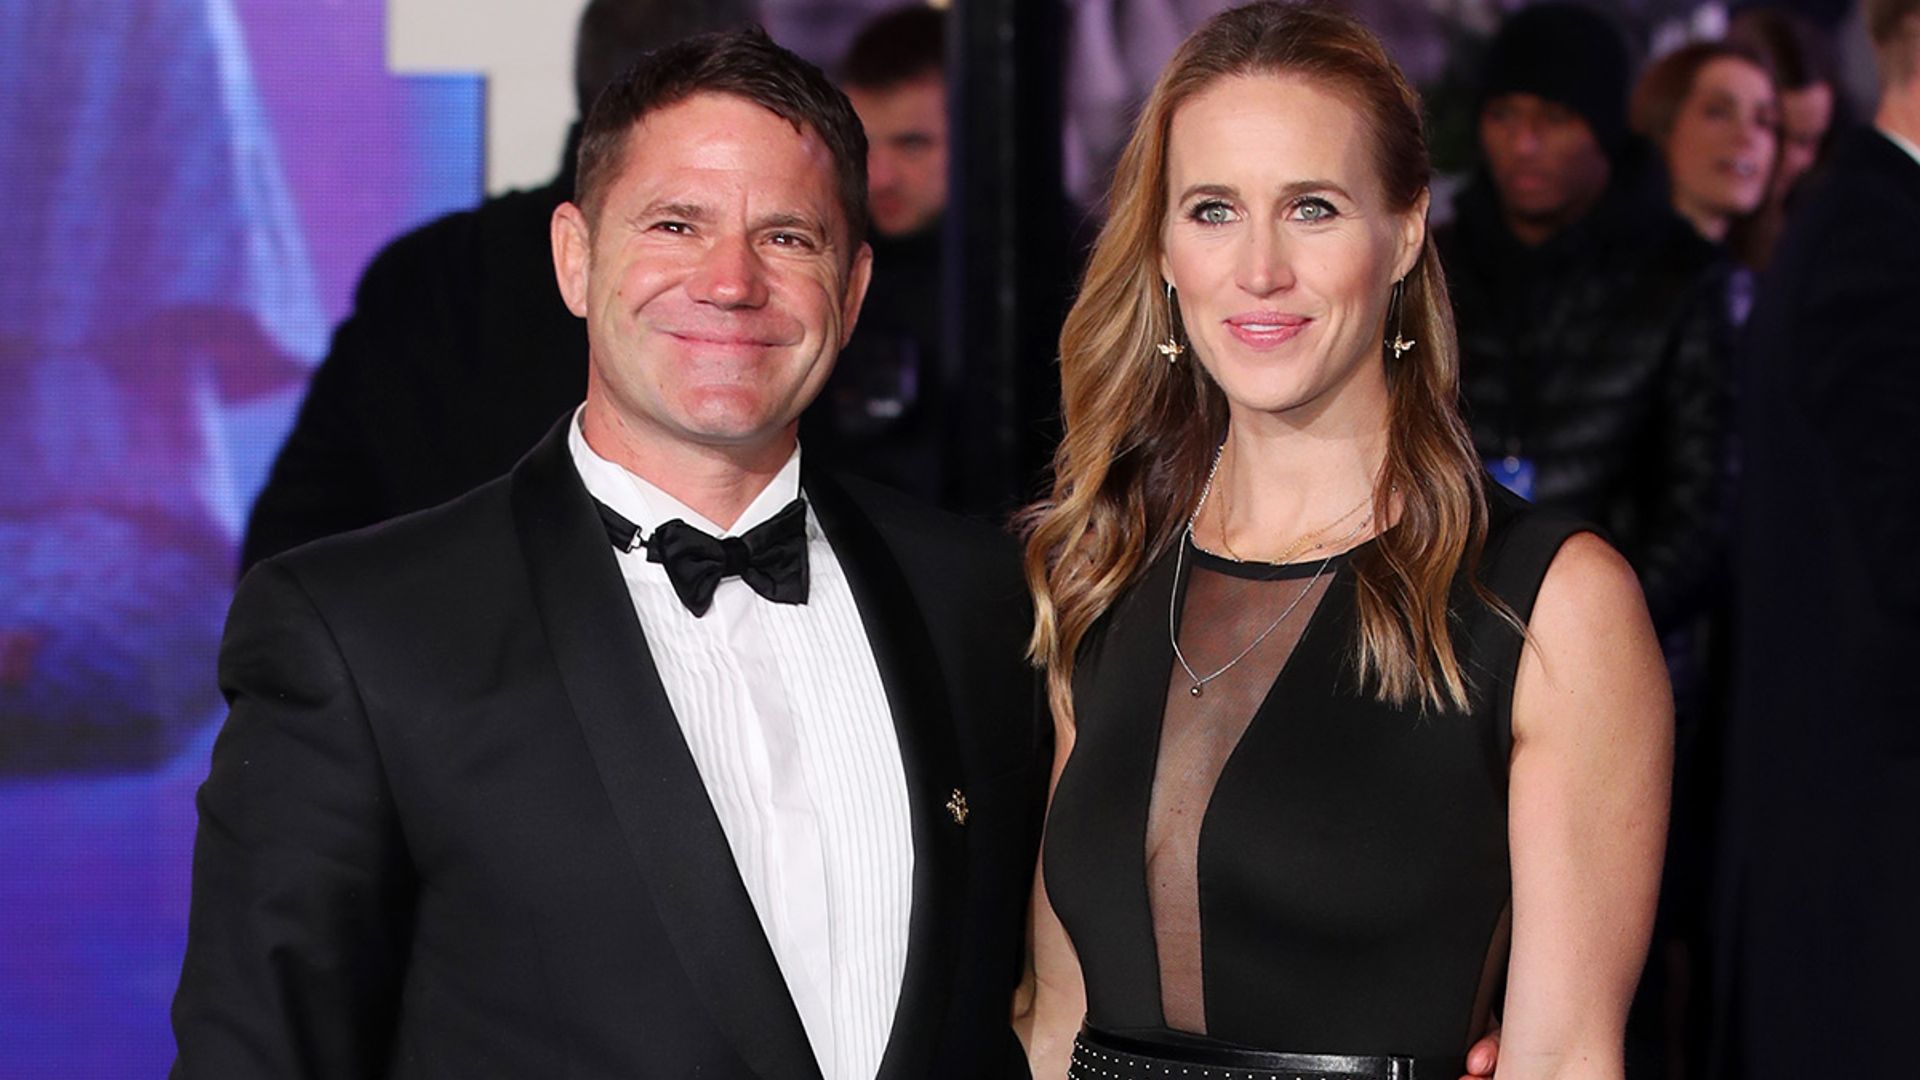 Helen Glover and Steve Backshall welcome twins! See adorable photo